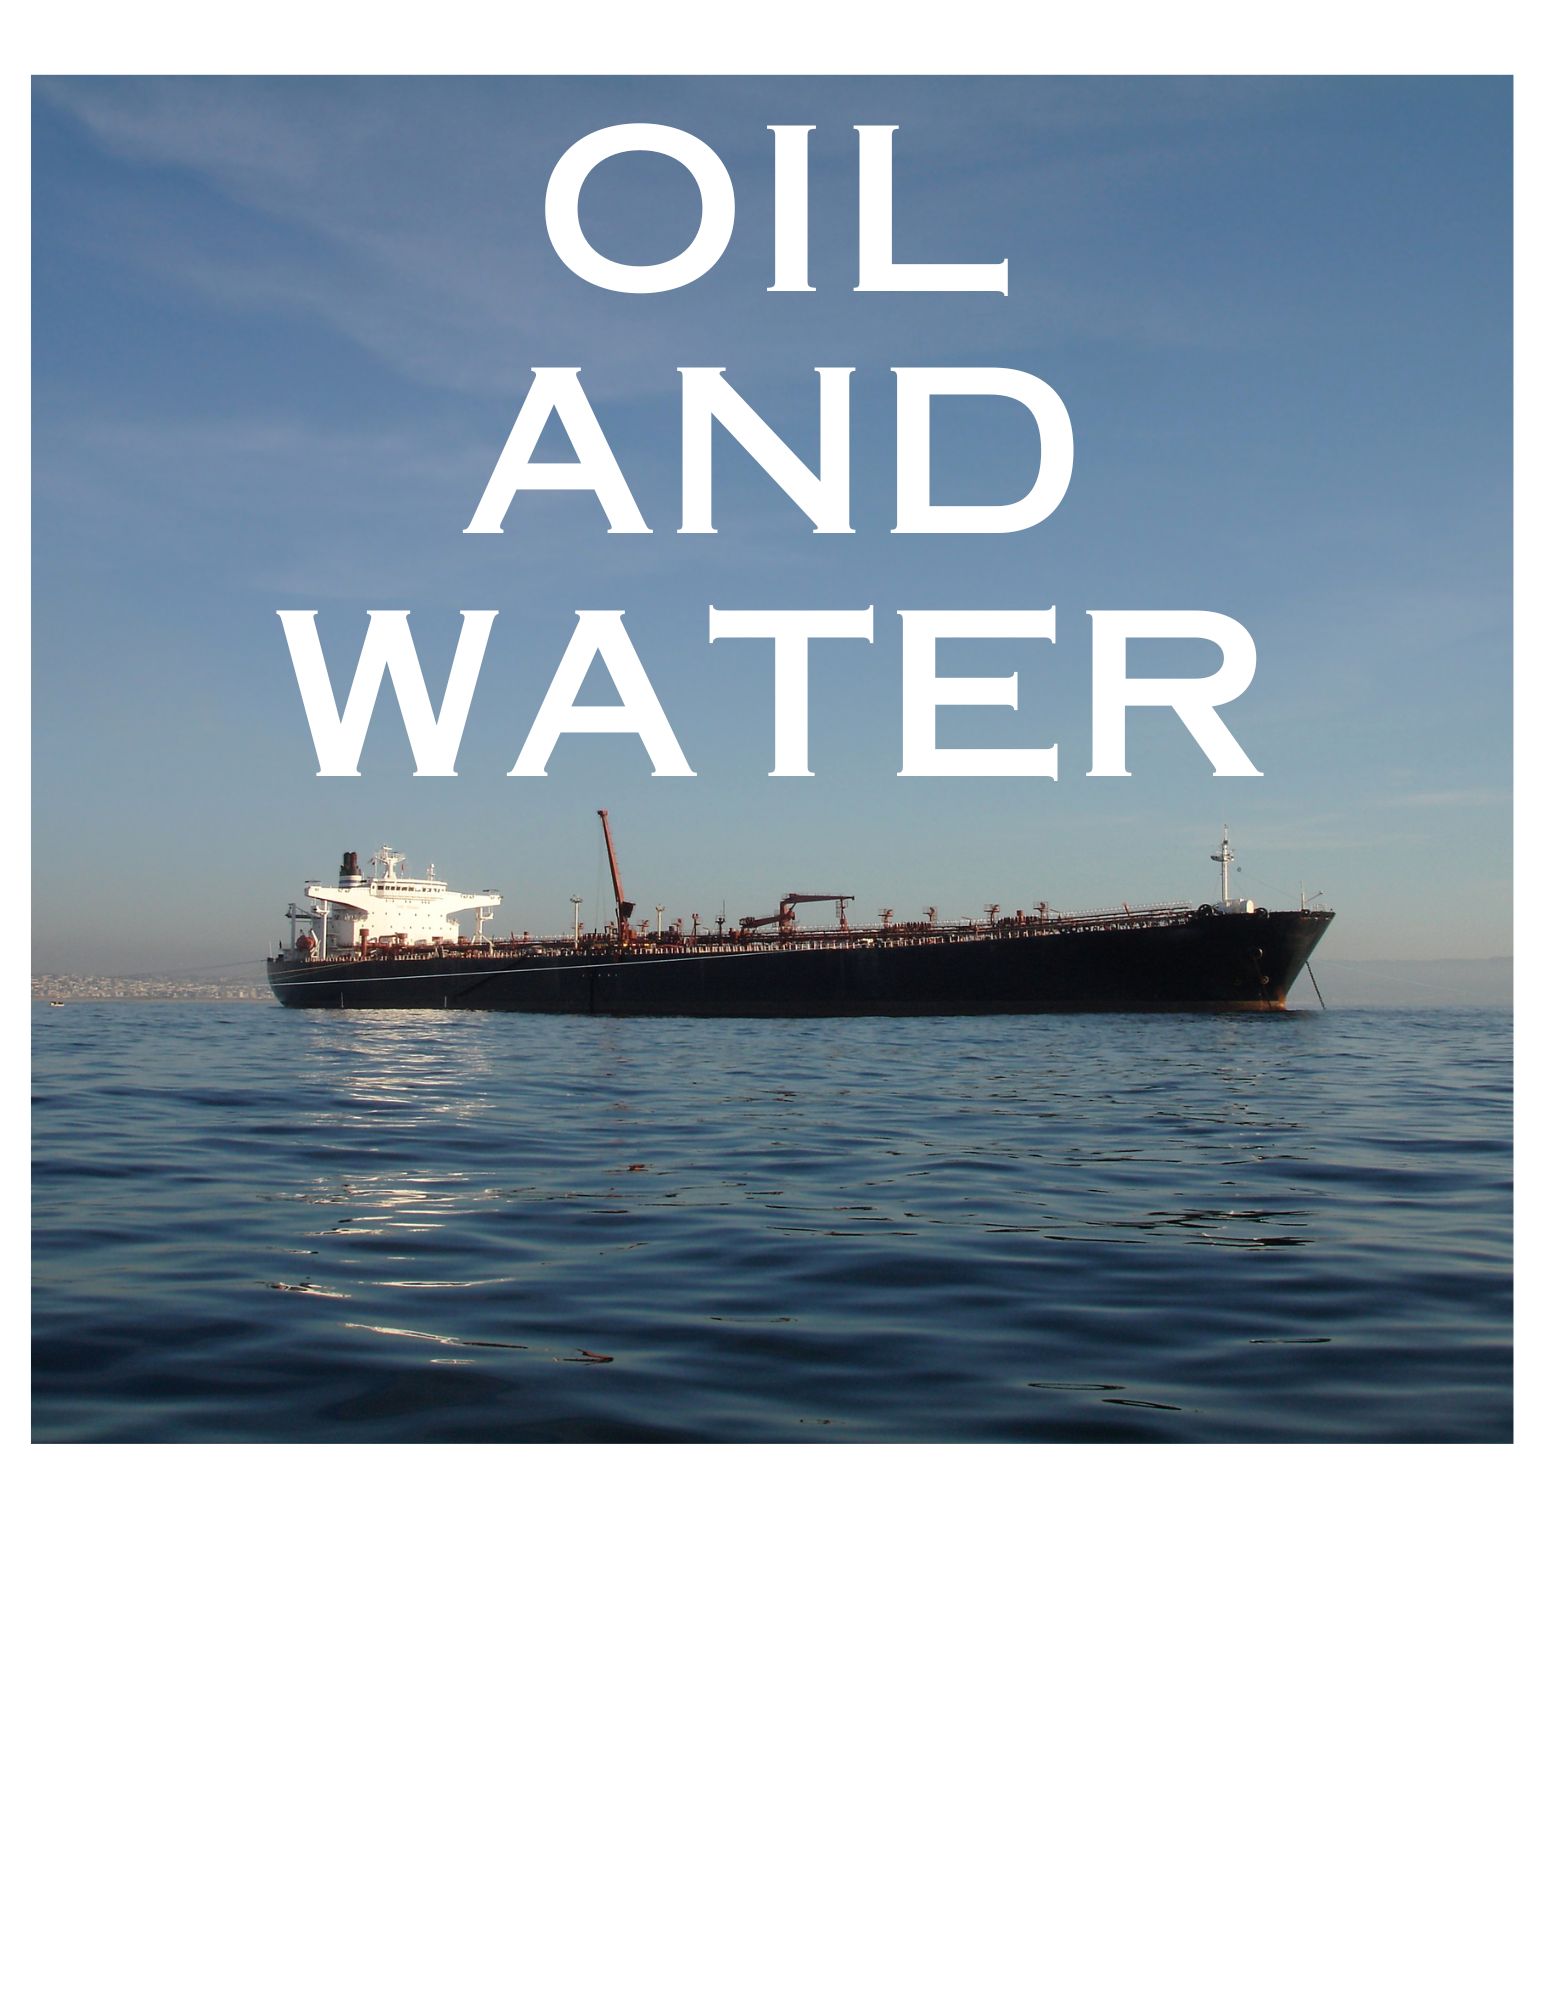 Photo of a large black oil tanker with a white bridge structure, in relatively still water, possibly at anchor near a bay. The words "Oil And Water" in capital letters and bold white text are above the ship in the photo.